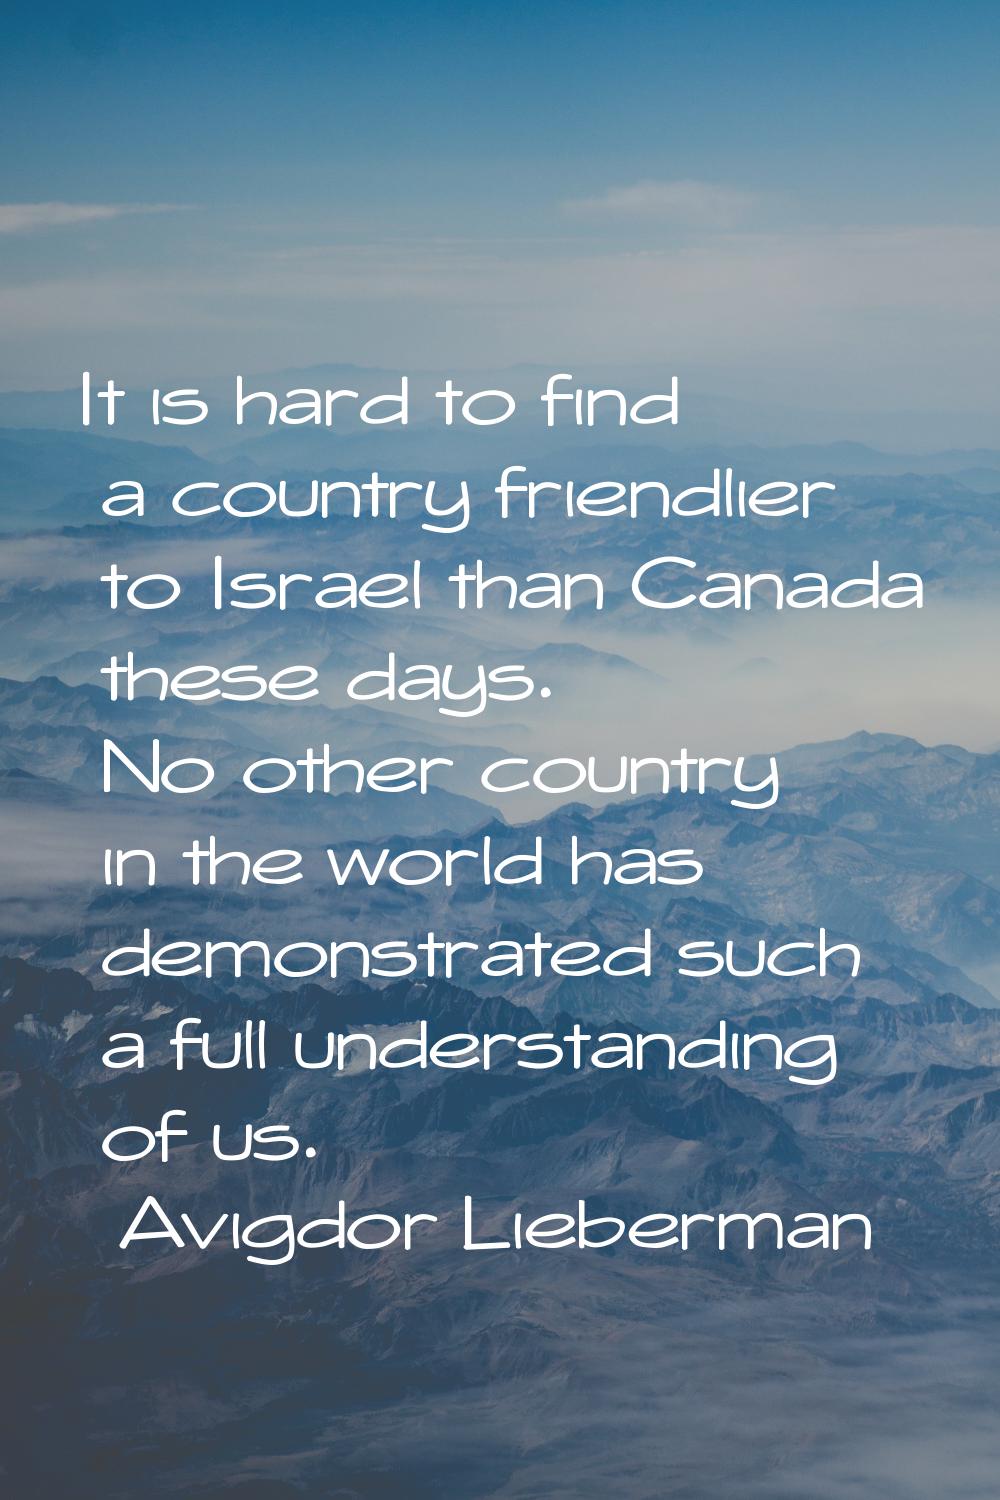 It is hard to find a country friendlier to Israel than Canada these days. No other country in the w